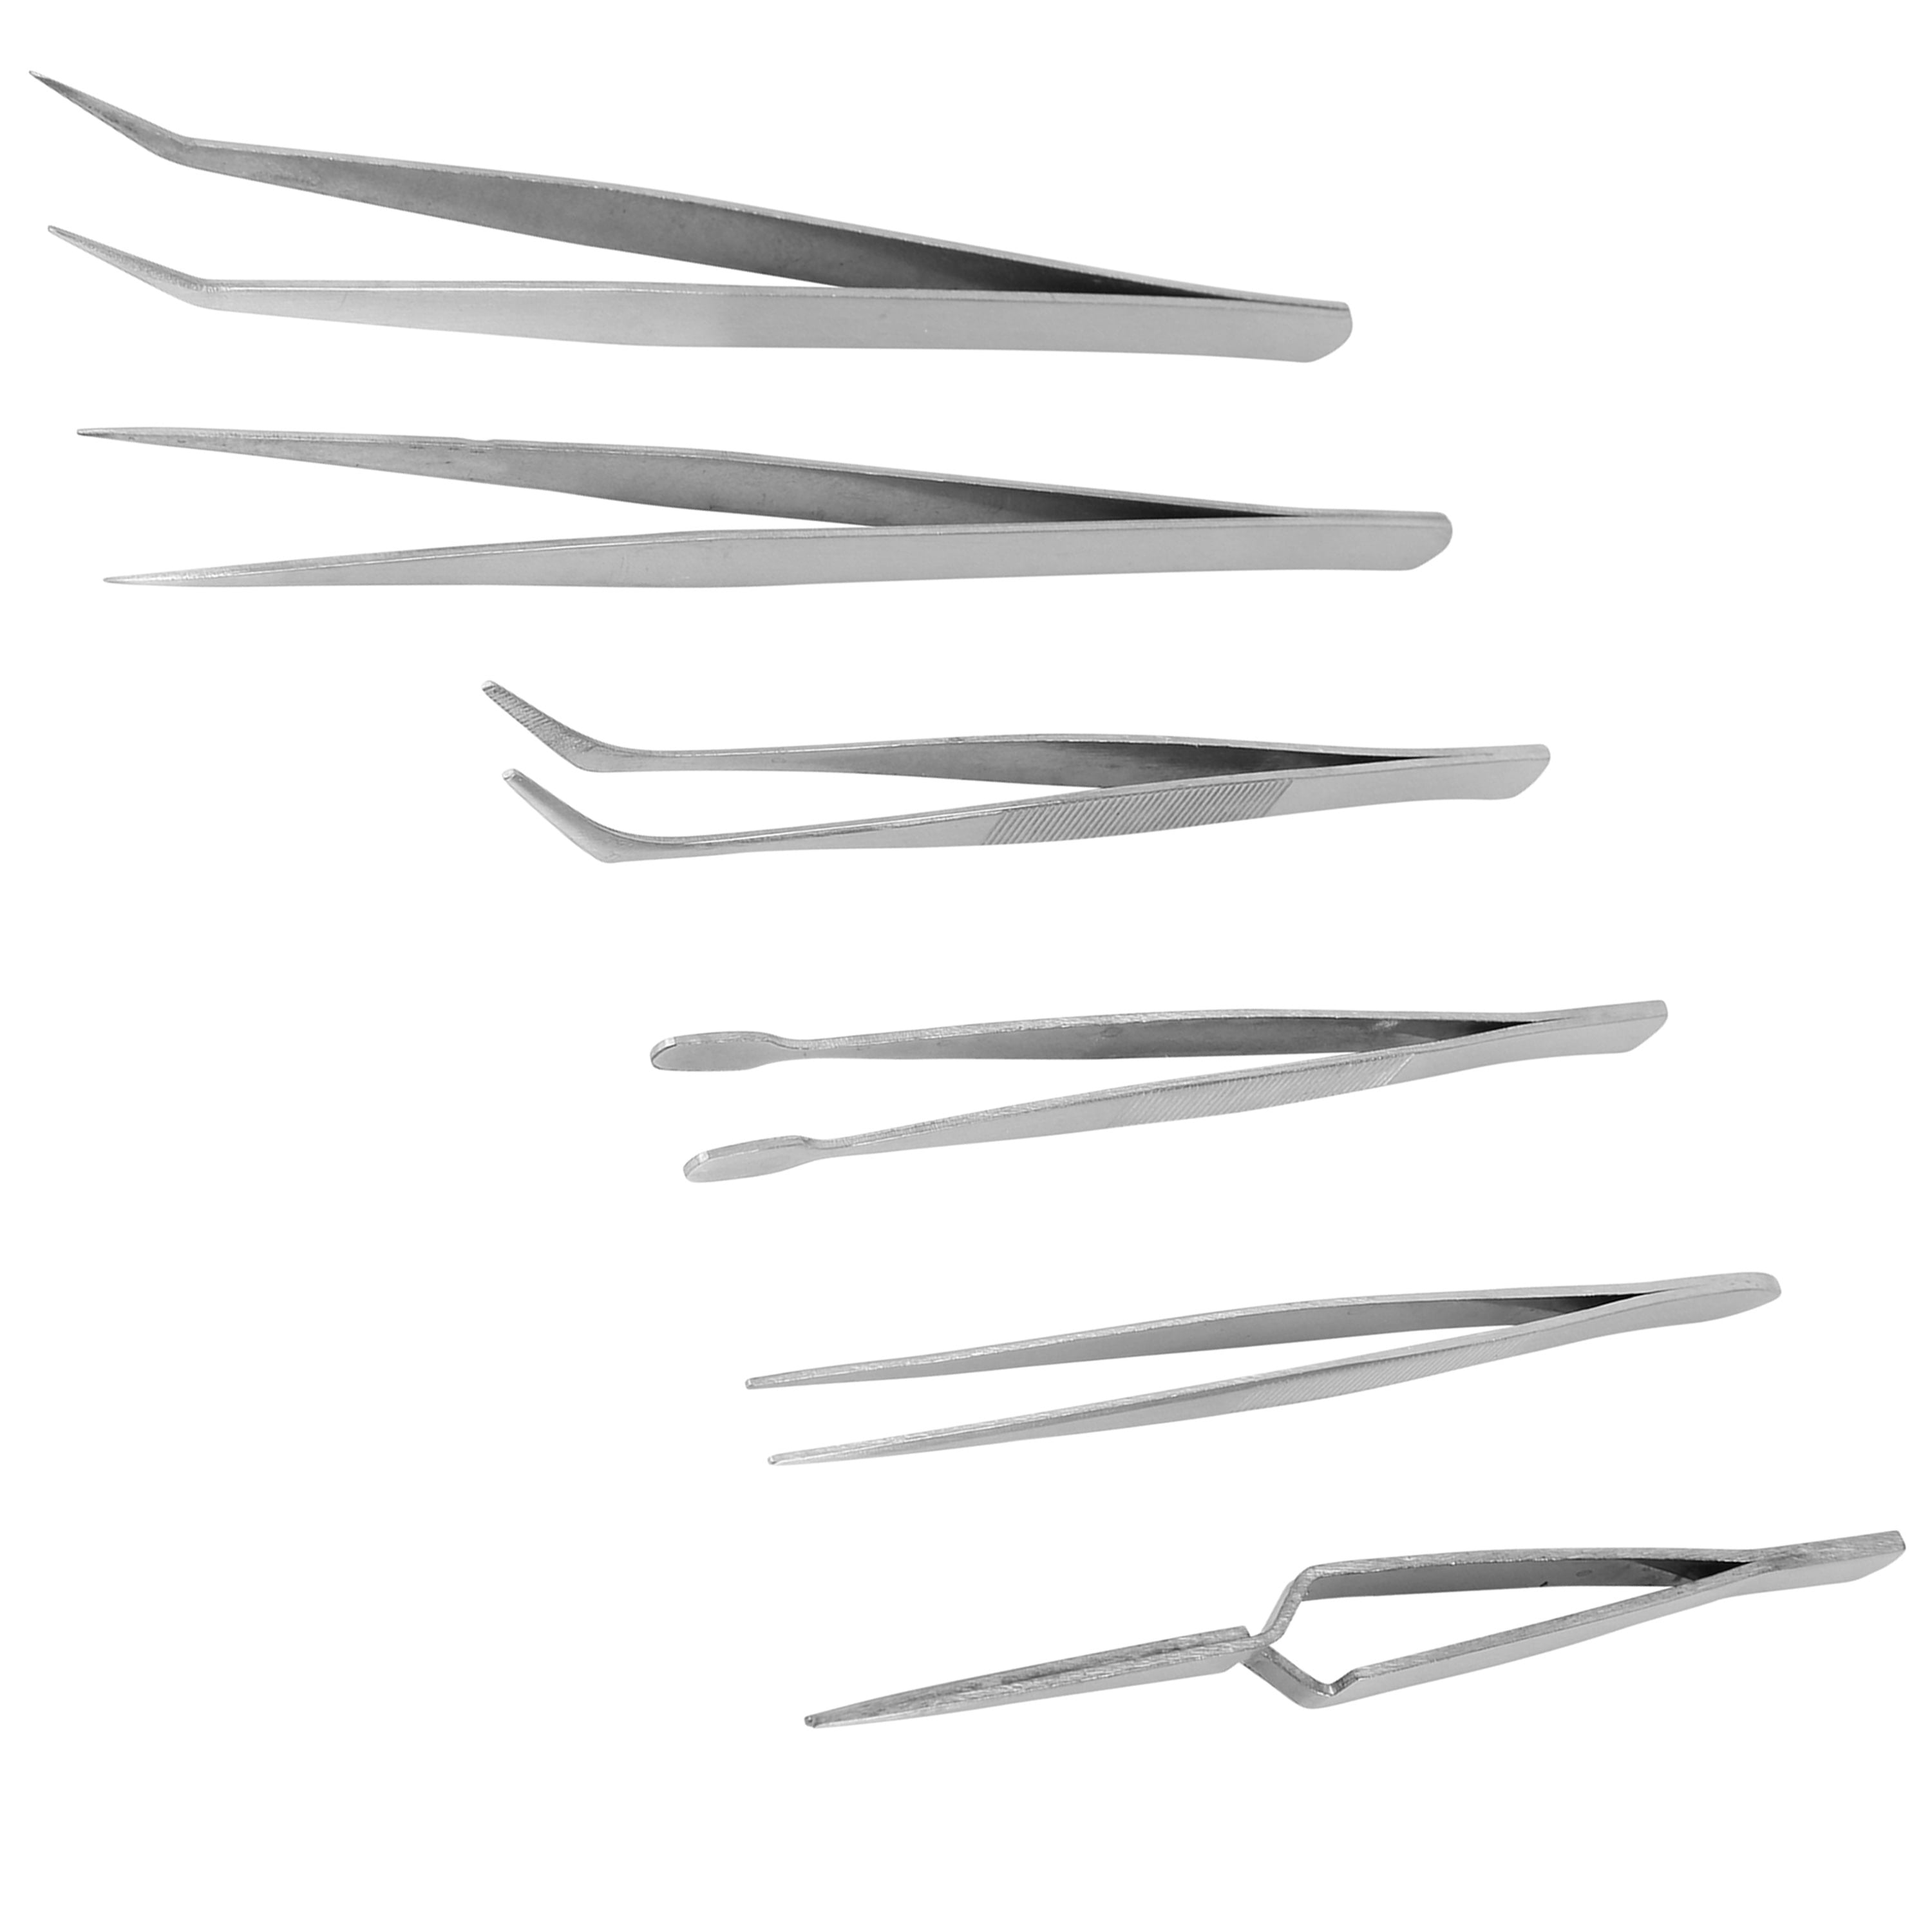 Straight Fastening Tweezers for Modeling & Crafts